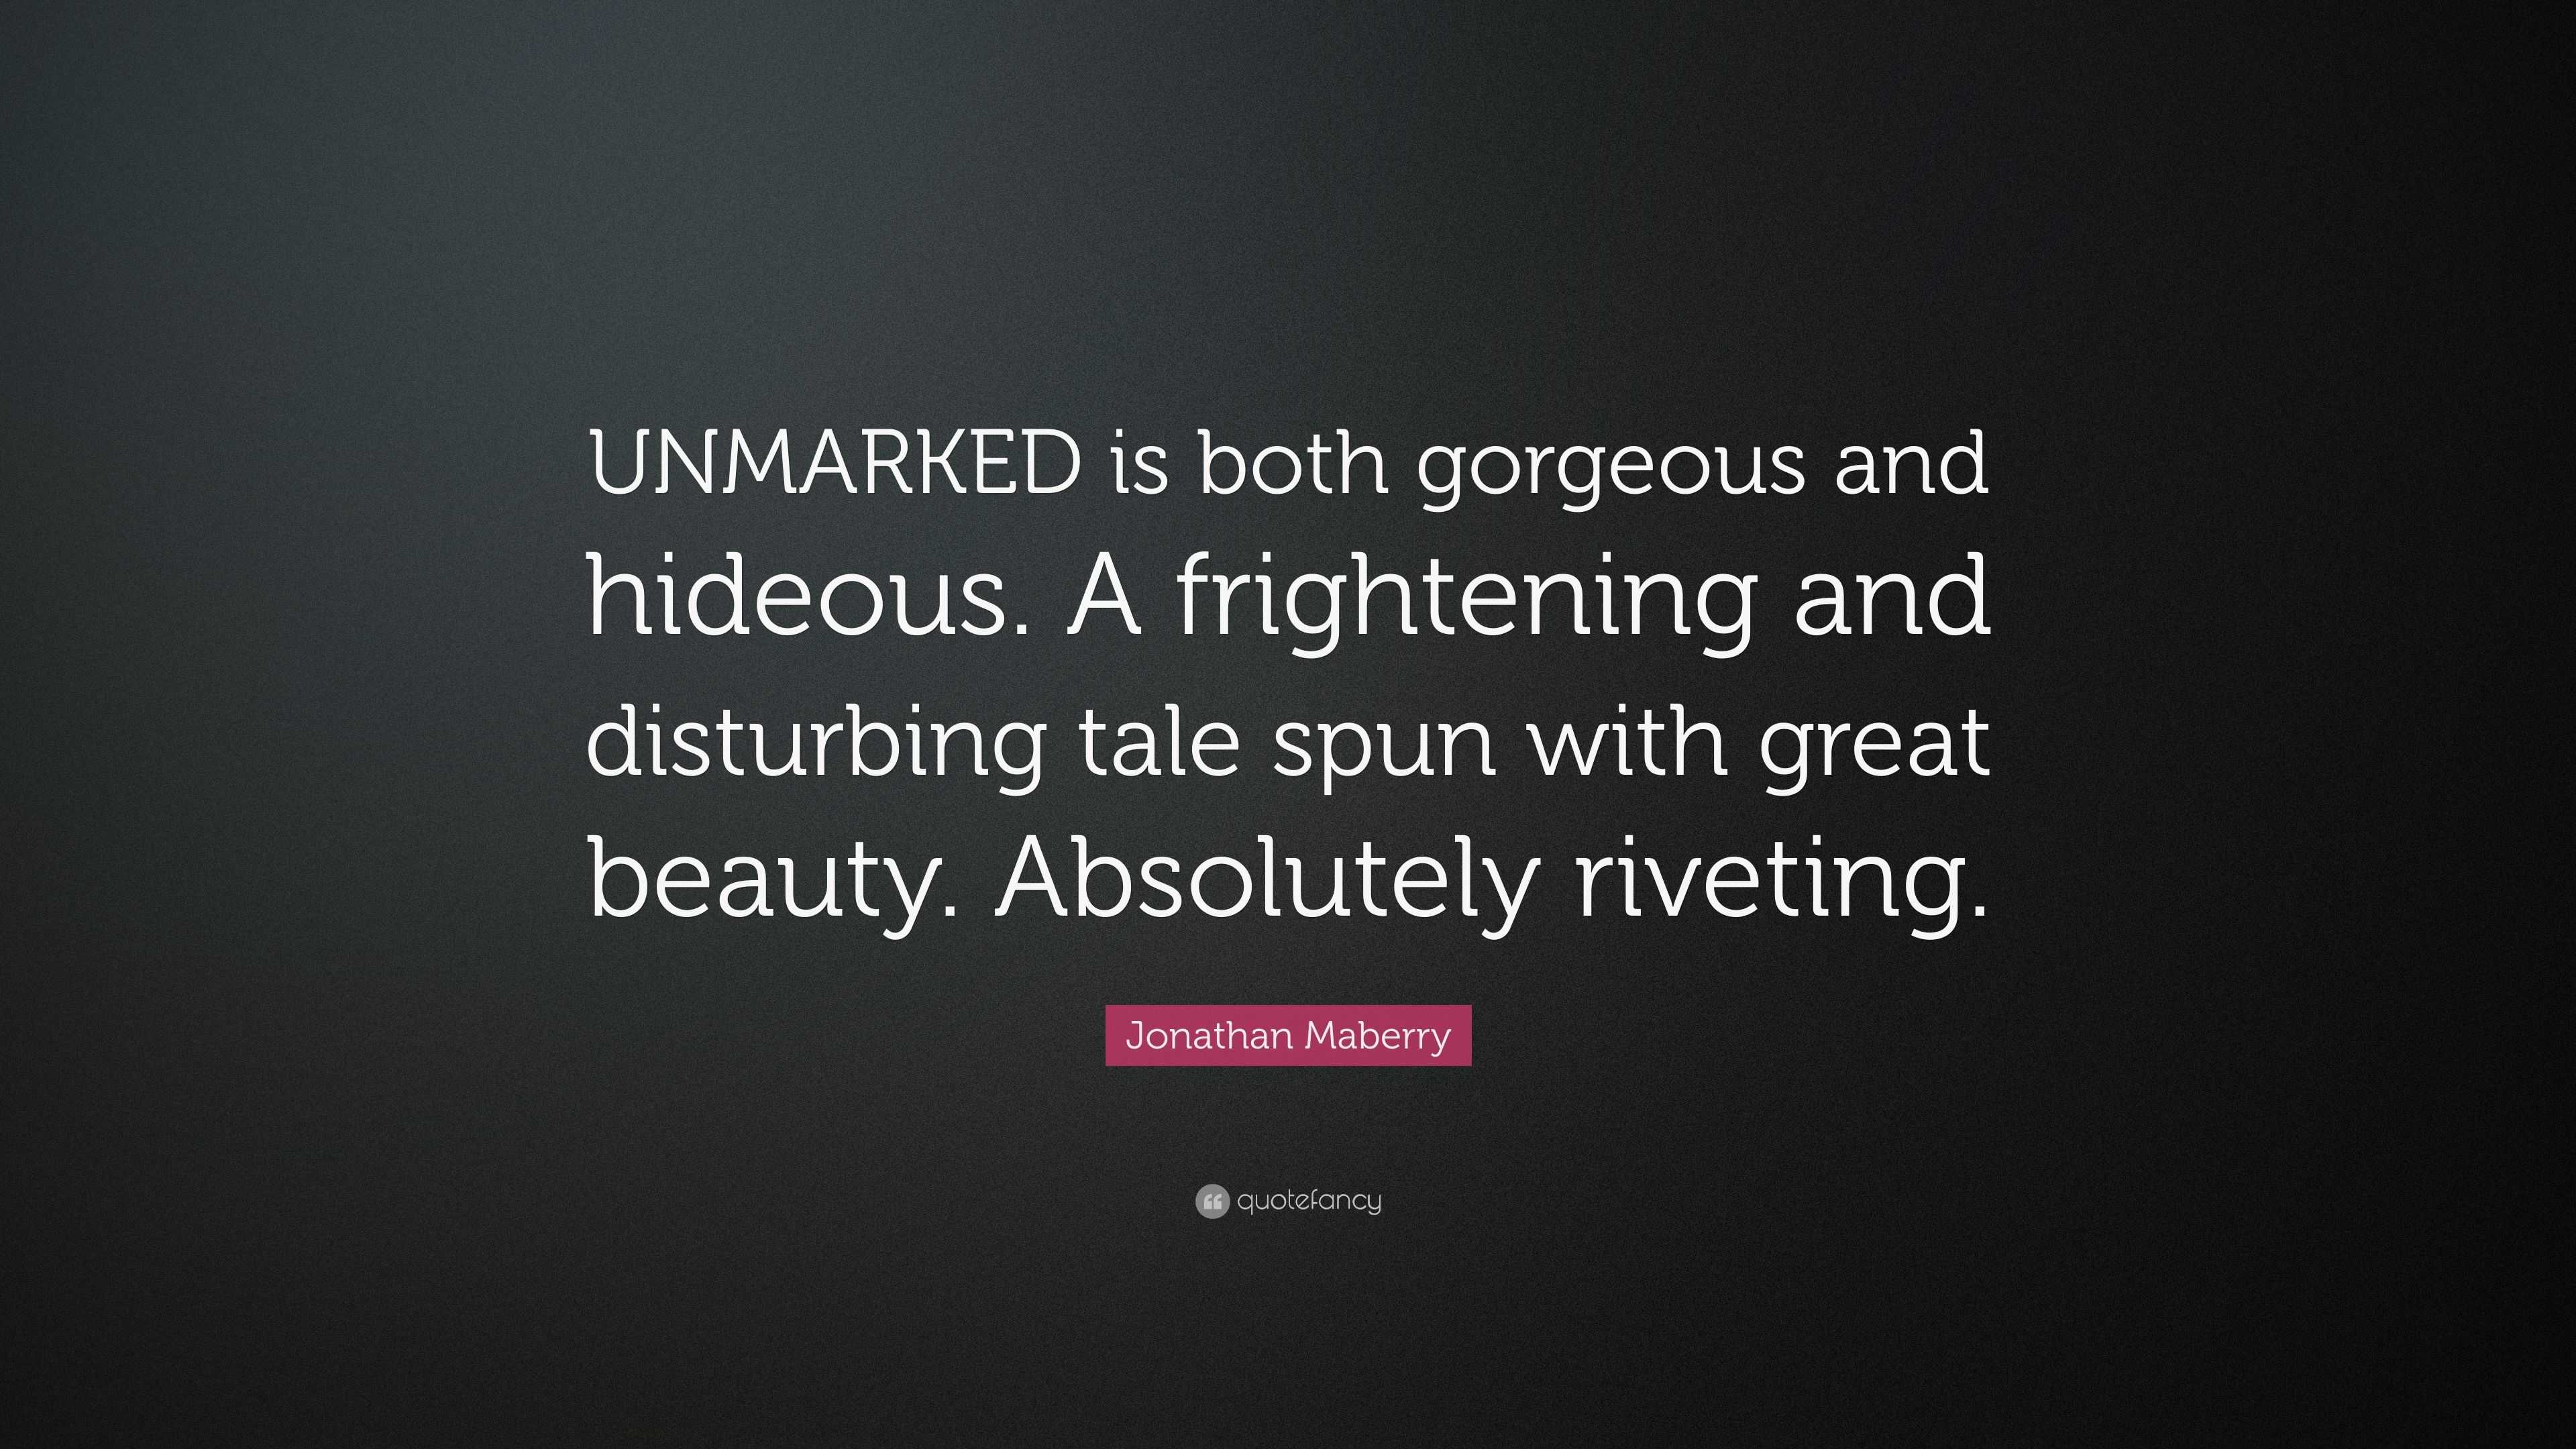 Jonathan Maberry Quote: “UNMARKED is both gorgeous and hideous. A ...